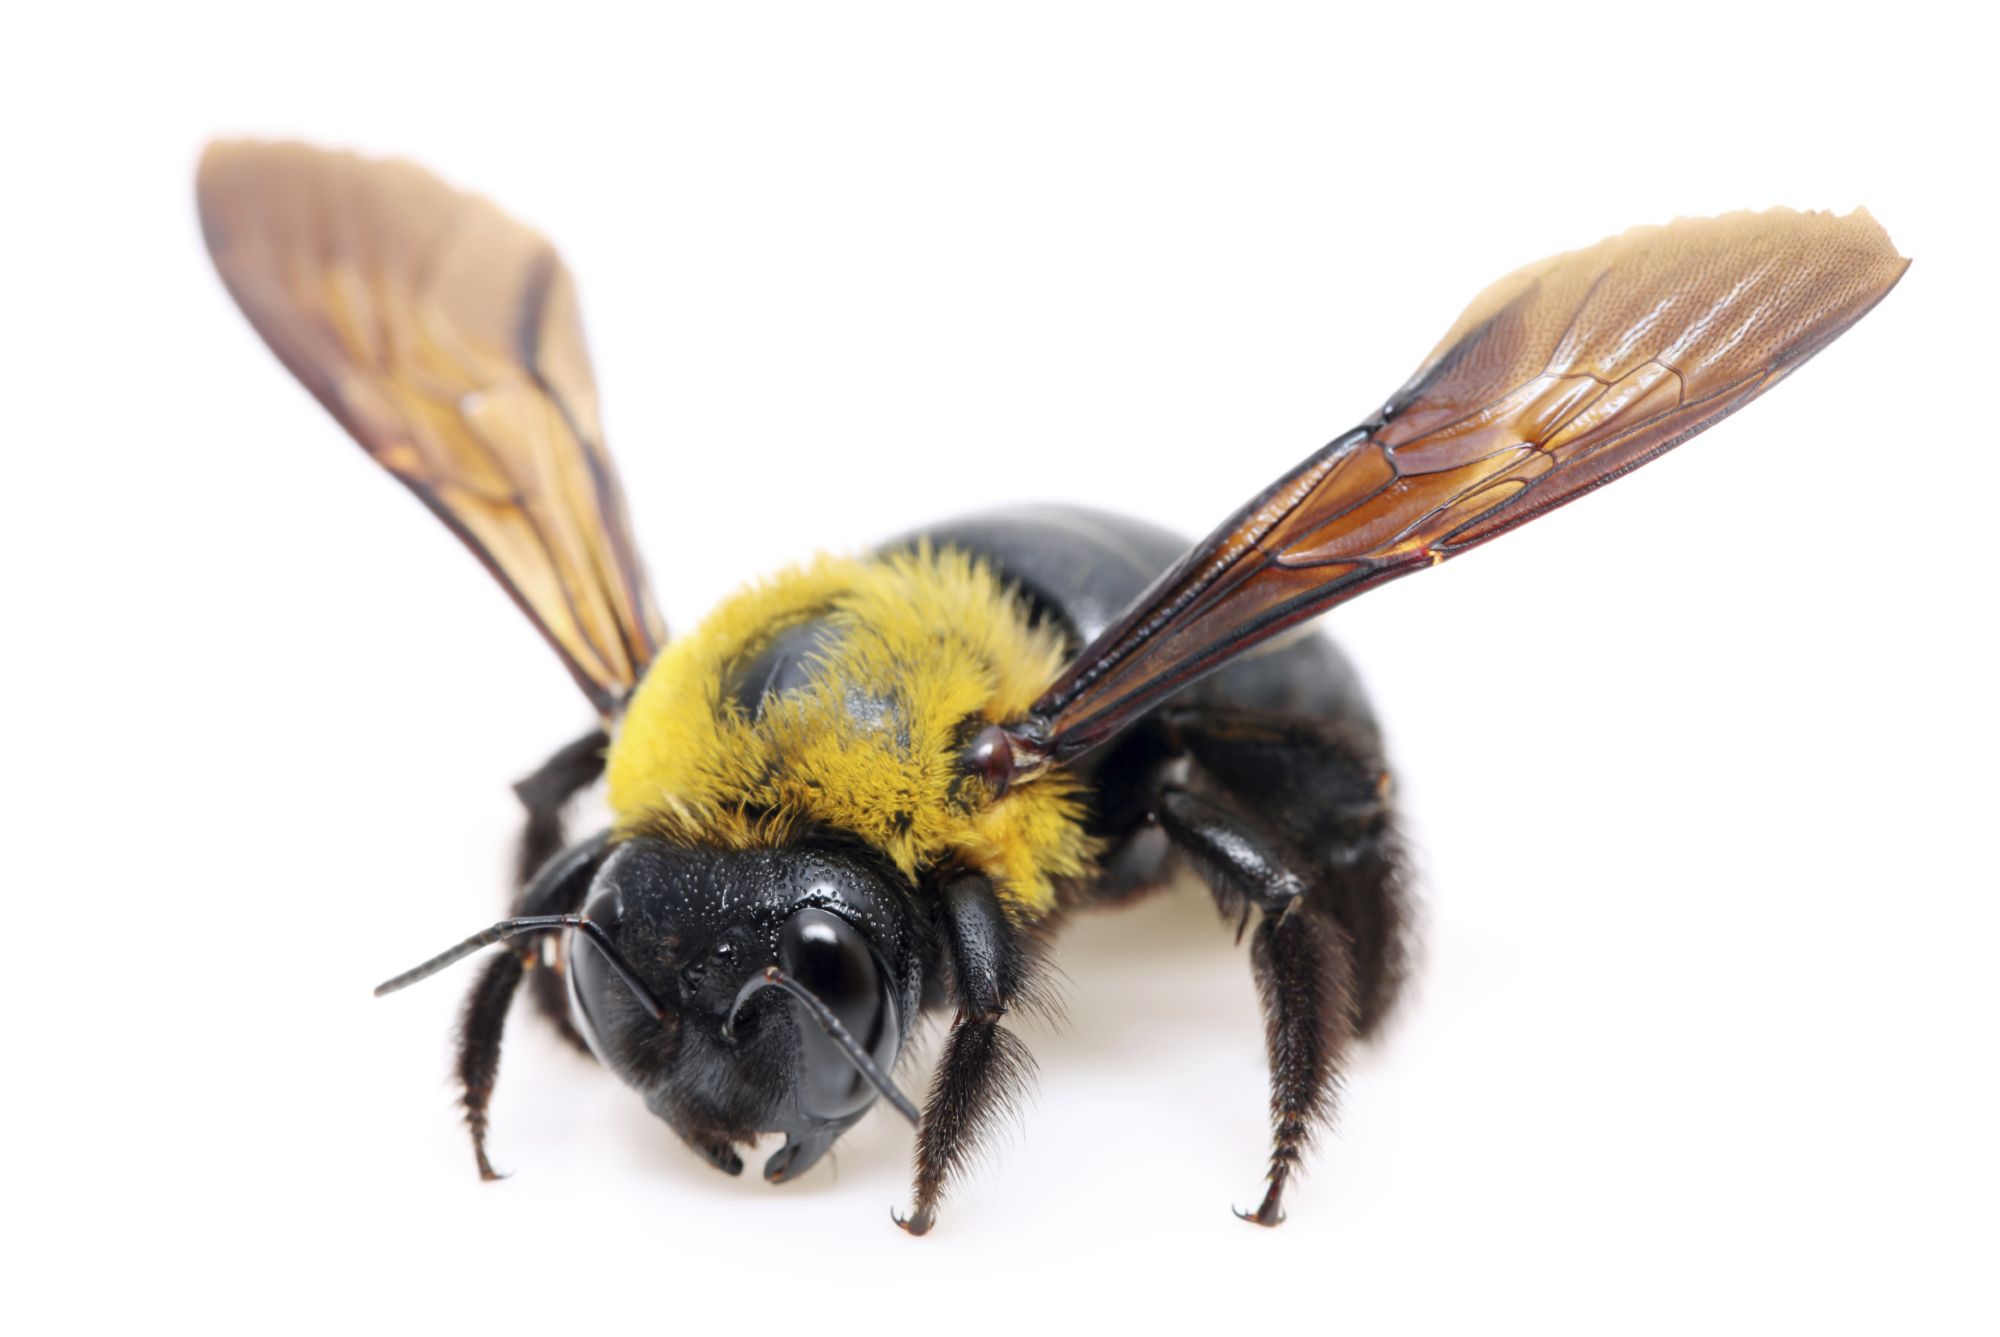 How To Get Rid of Carpenter Bees